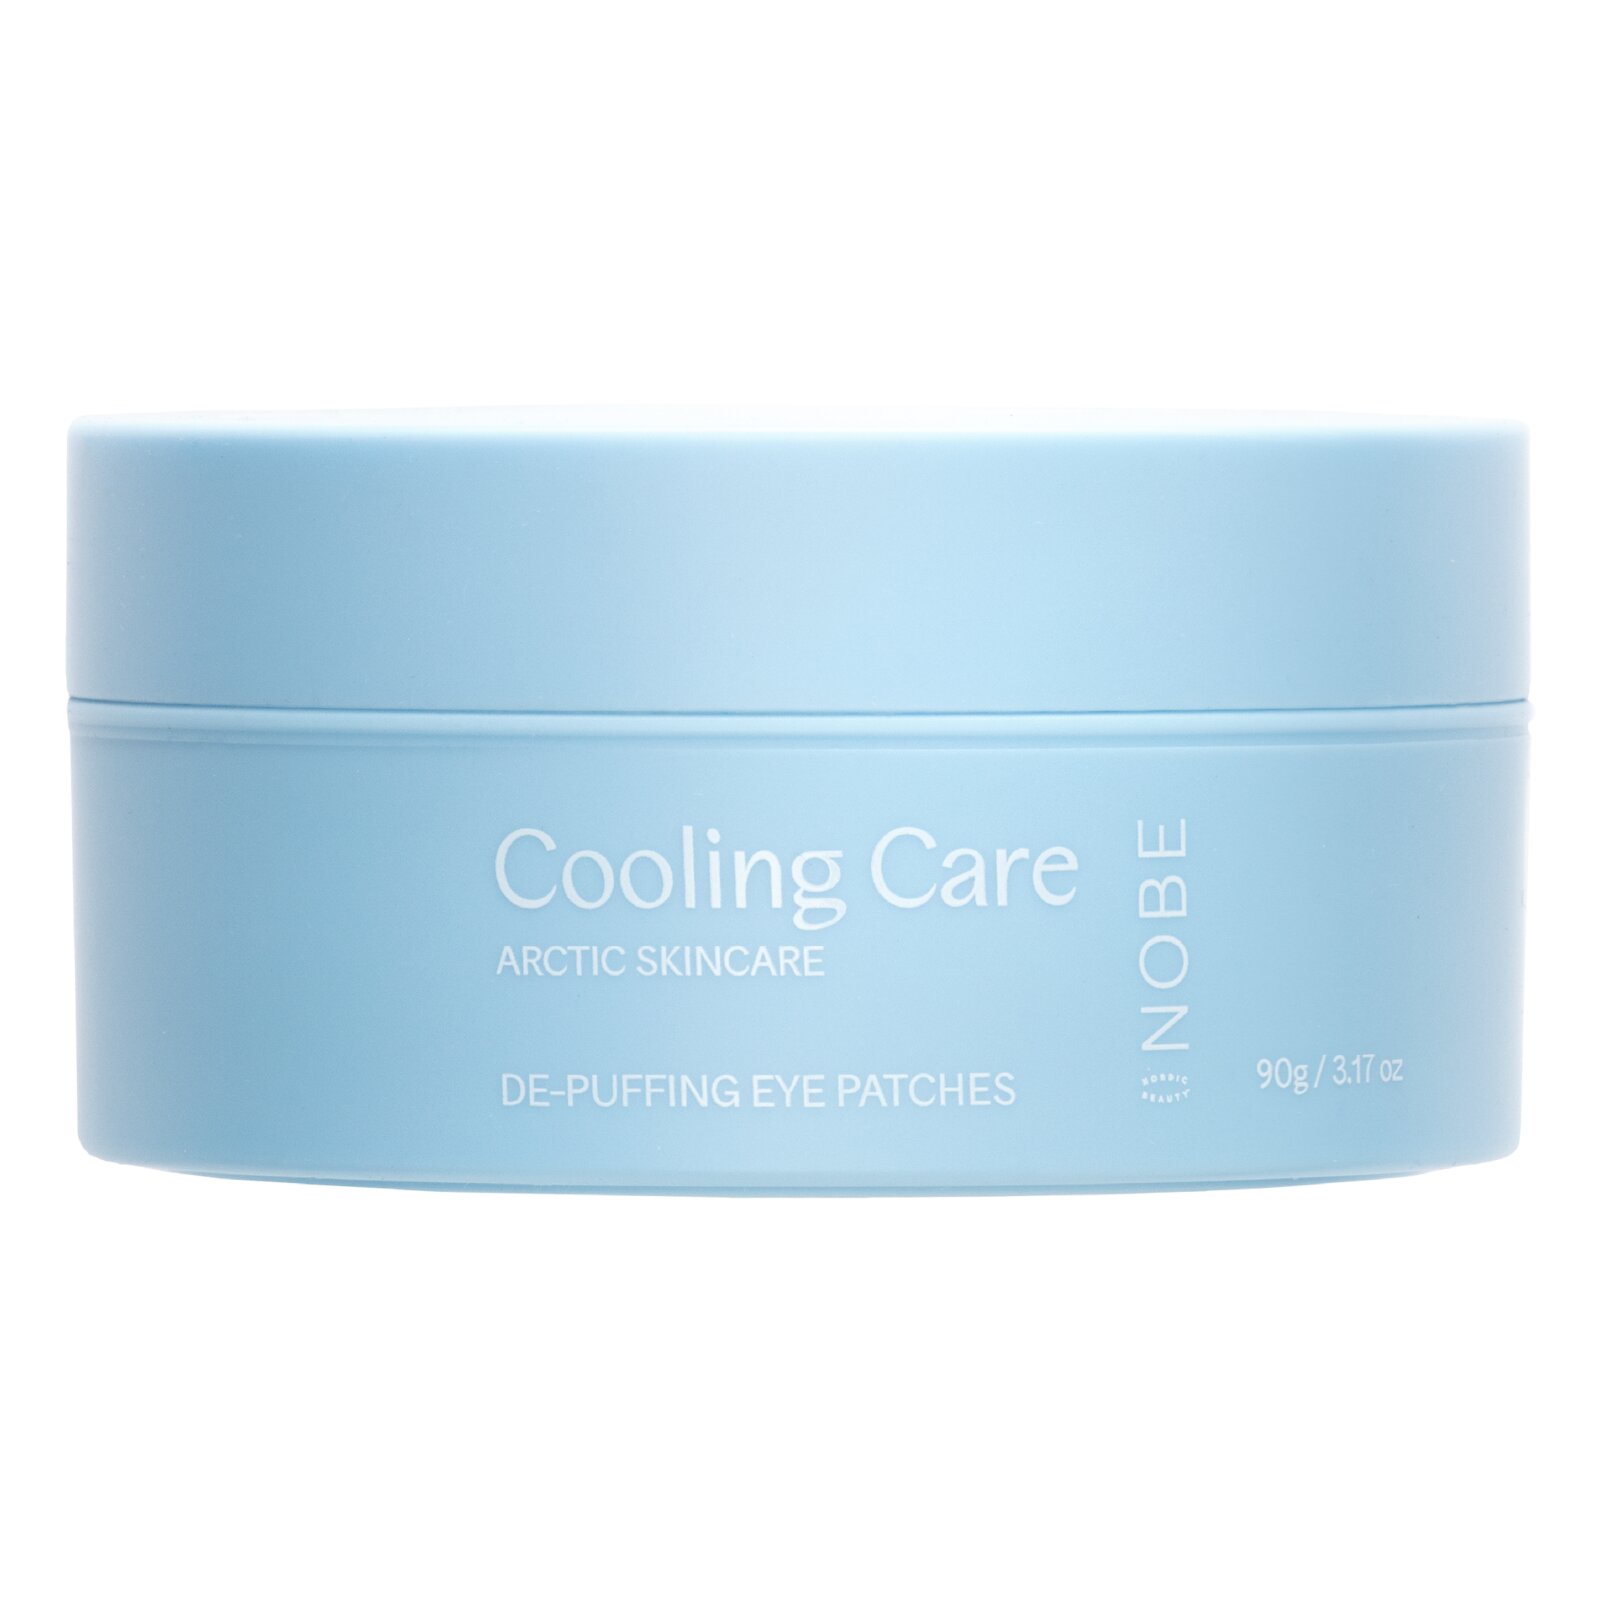 NOBE Cooling Care De-Puffing Eye Patches hydrogeelinaamiot